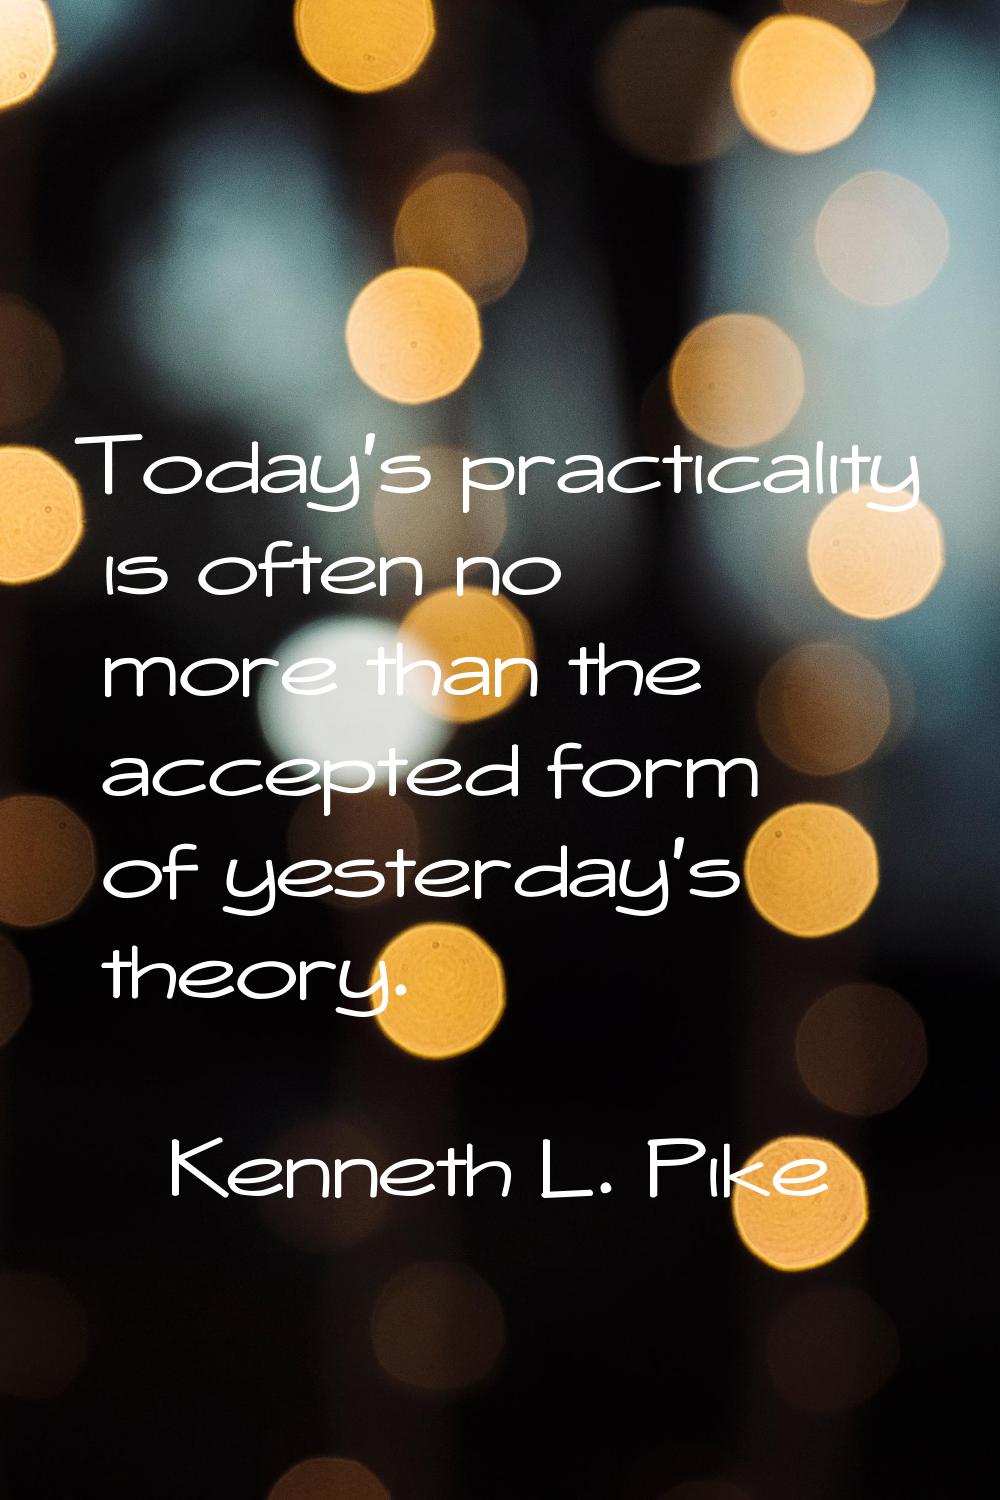 Today's practicality is often no more than the accepted form of yesterday's theory.